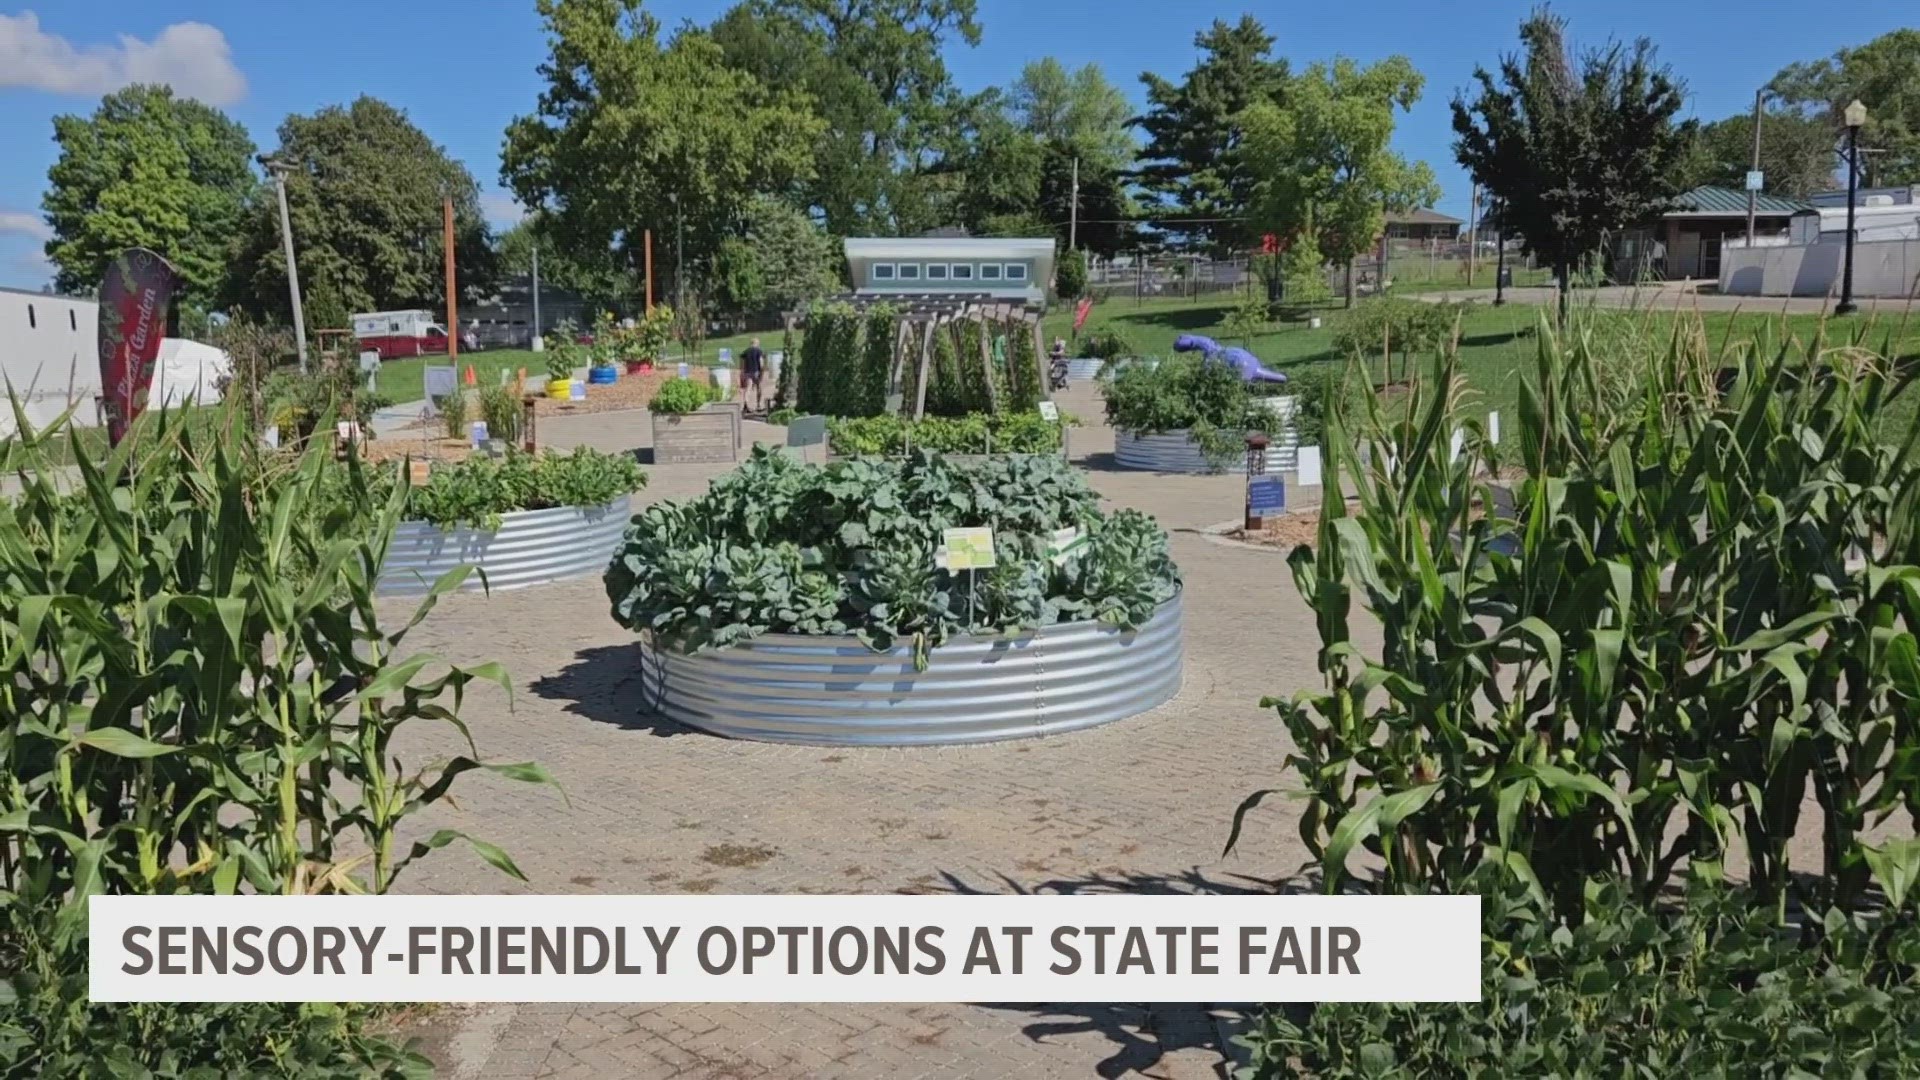 ChildServe and the Iowa State Fair partnered for a second year to provide sensory-friendly options for visitors